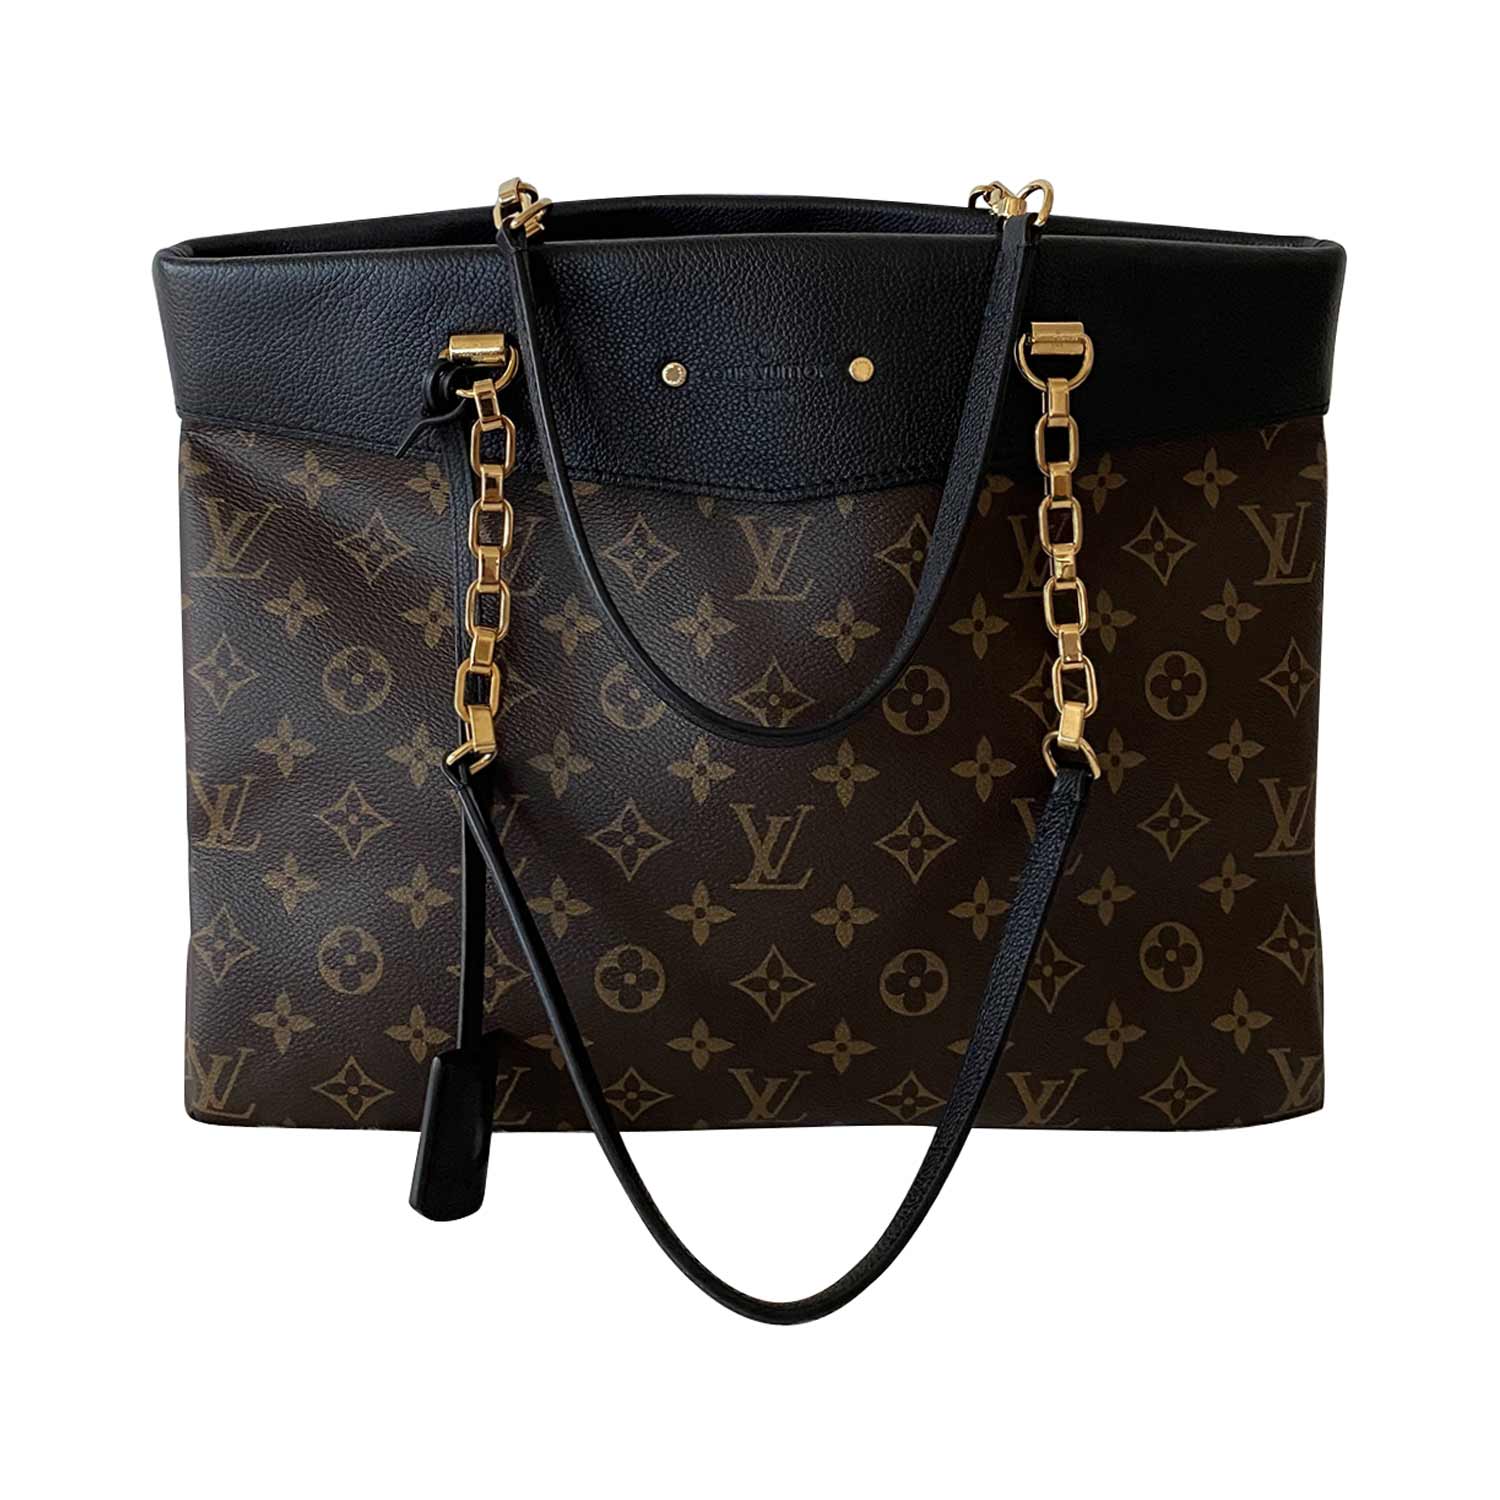 LV PALLAS TOTE #AUTHENTIC #preloved #secondhand #consignment